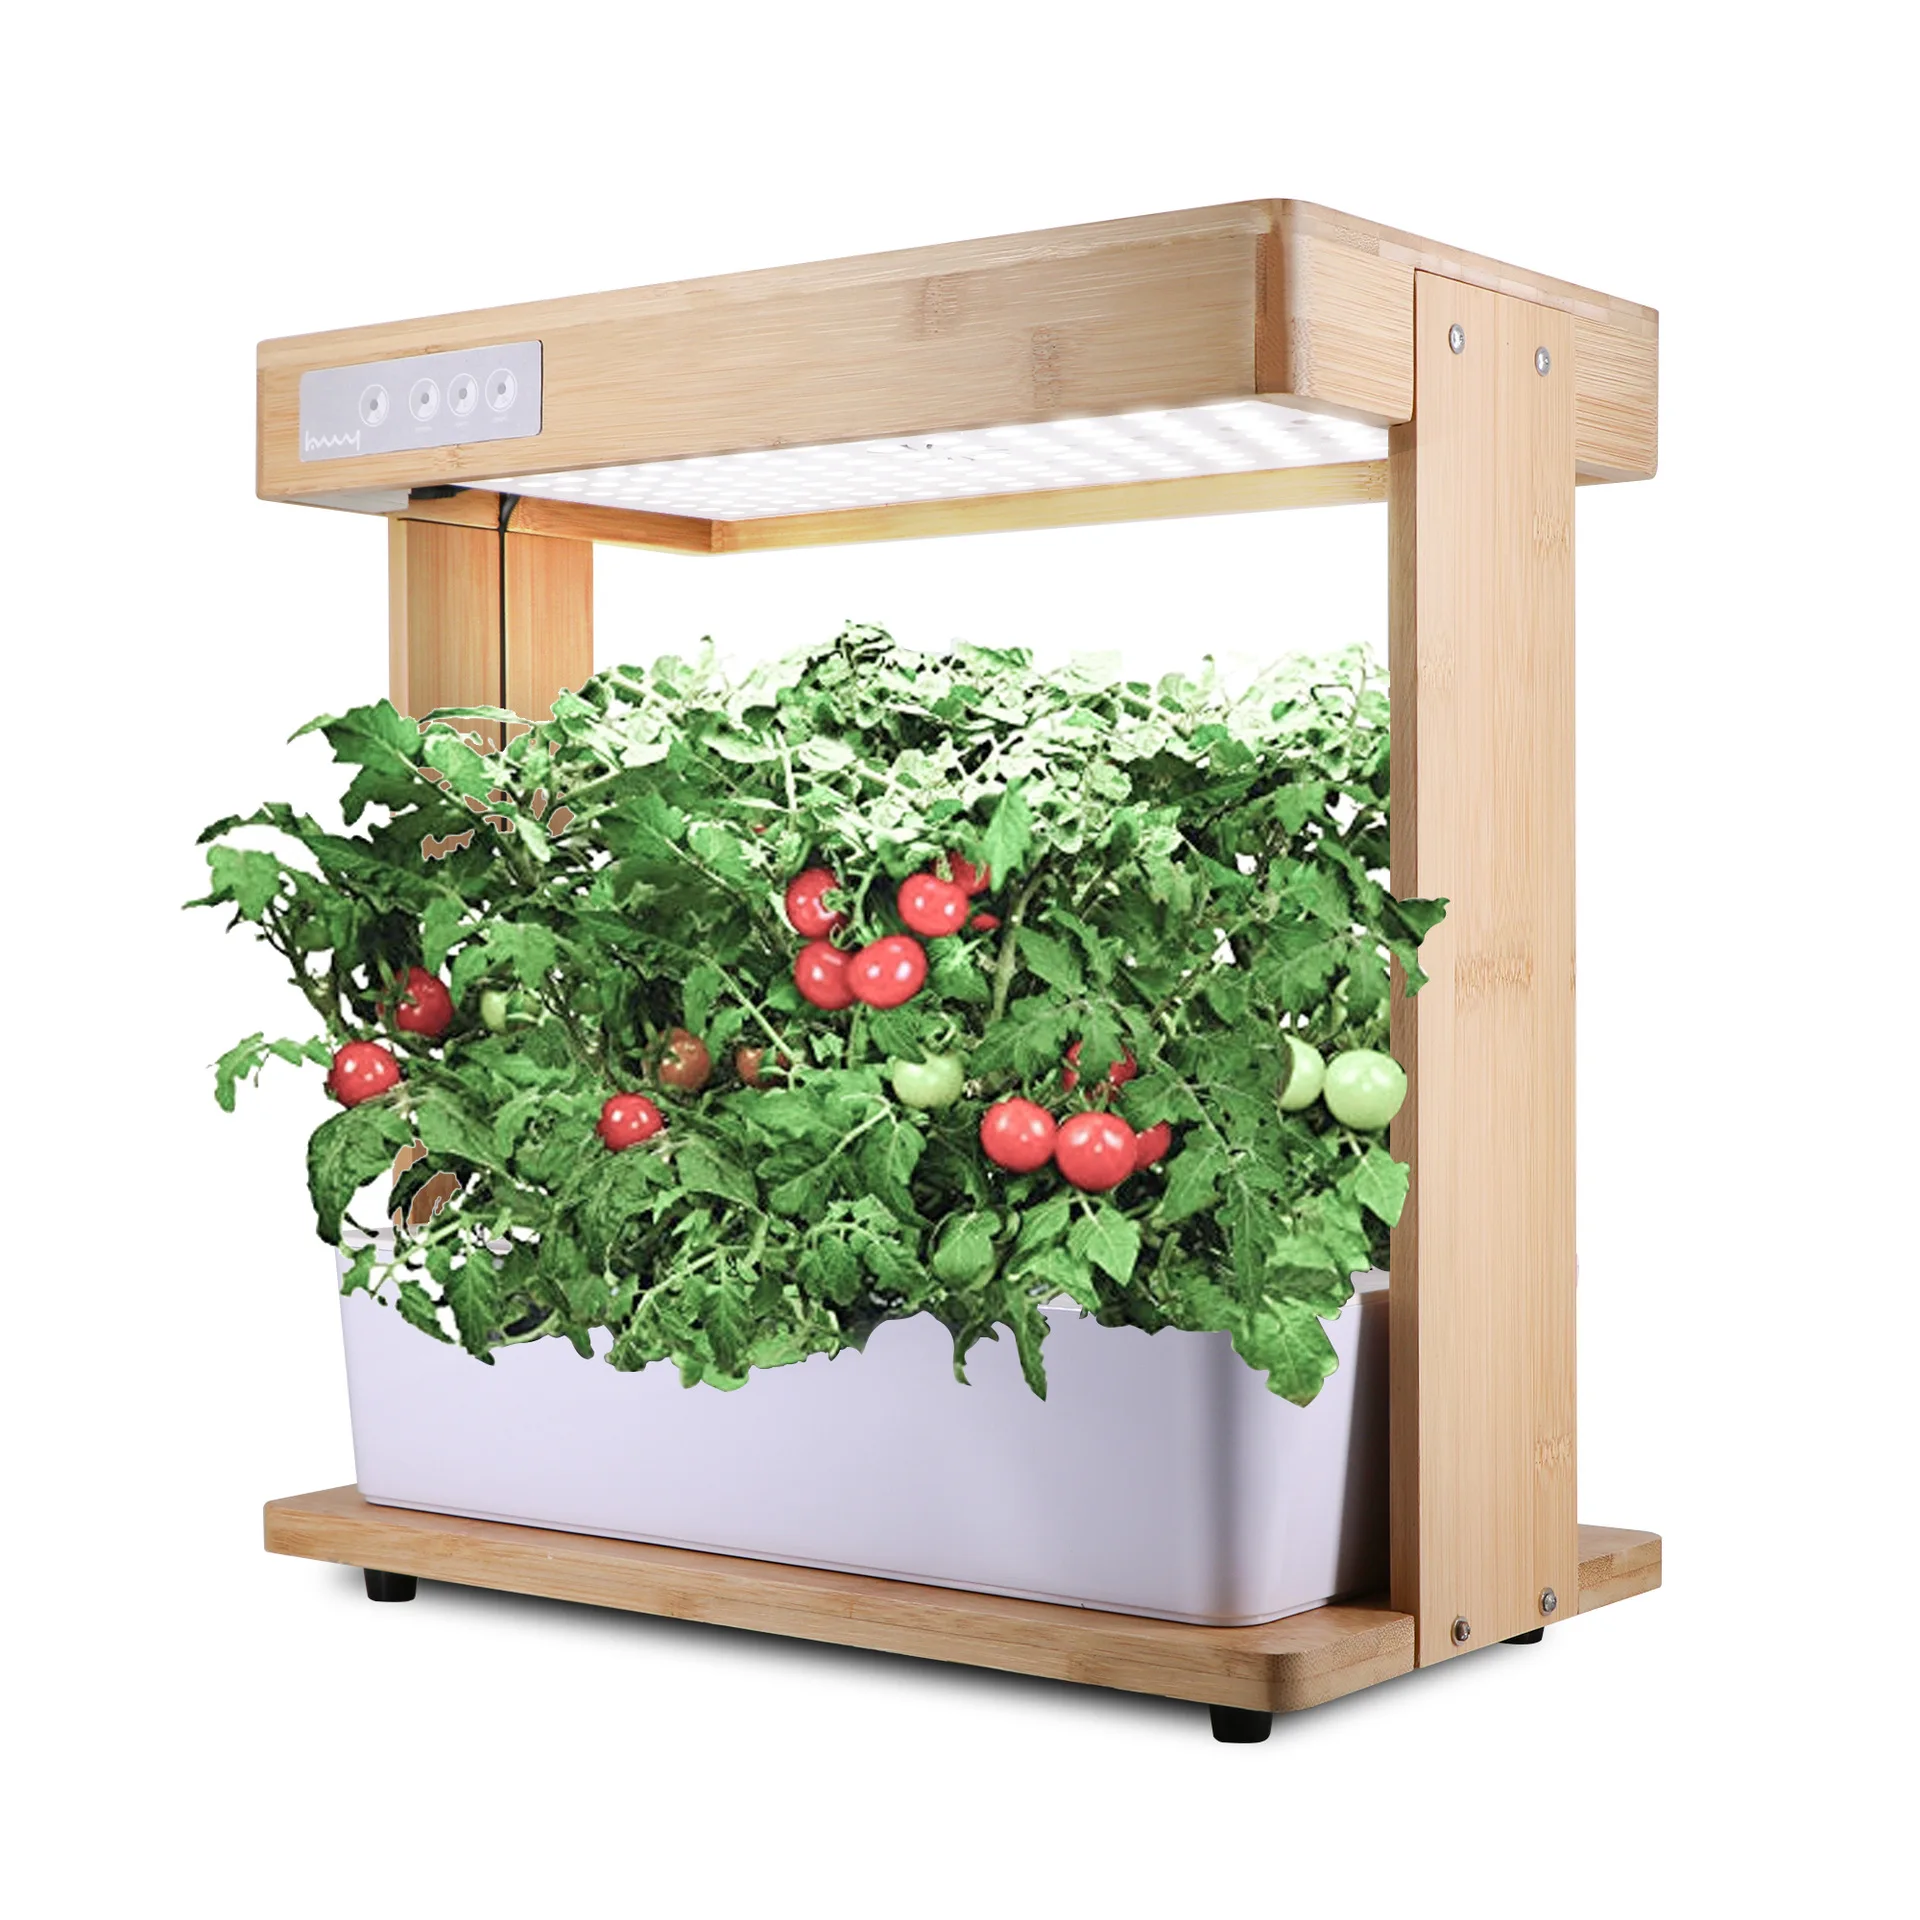 Hydroponic Farm Growing Equipment Indoor Grow Kit Hydroponic Grow Systems With LED Grow Light